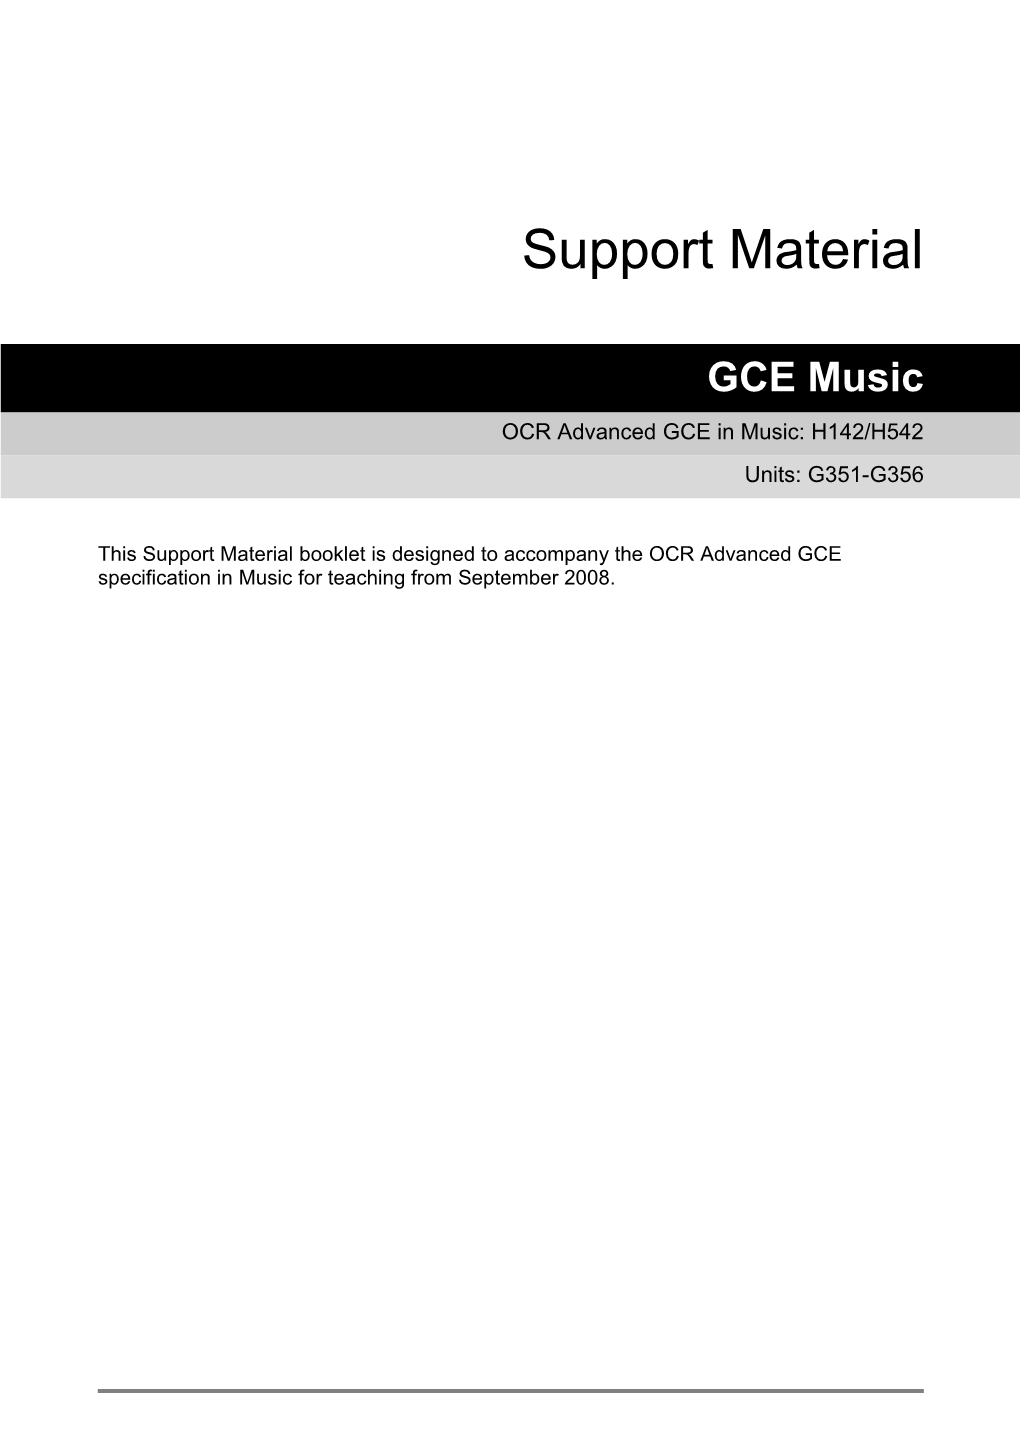 OCR Advanced GCE in Music: H142/H542